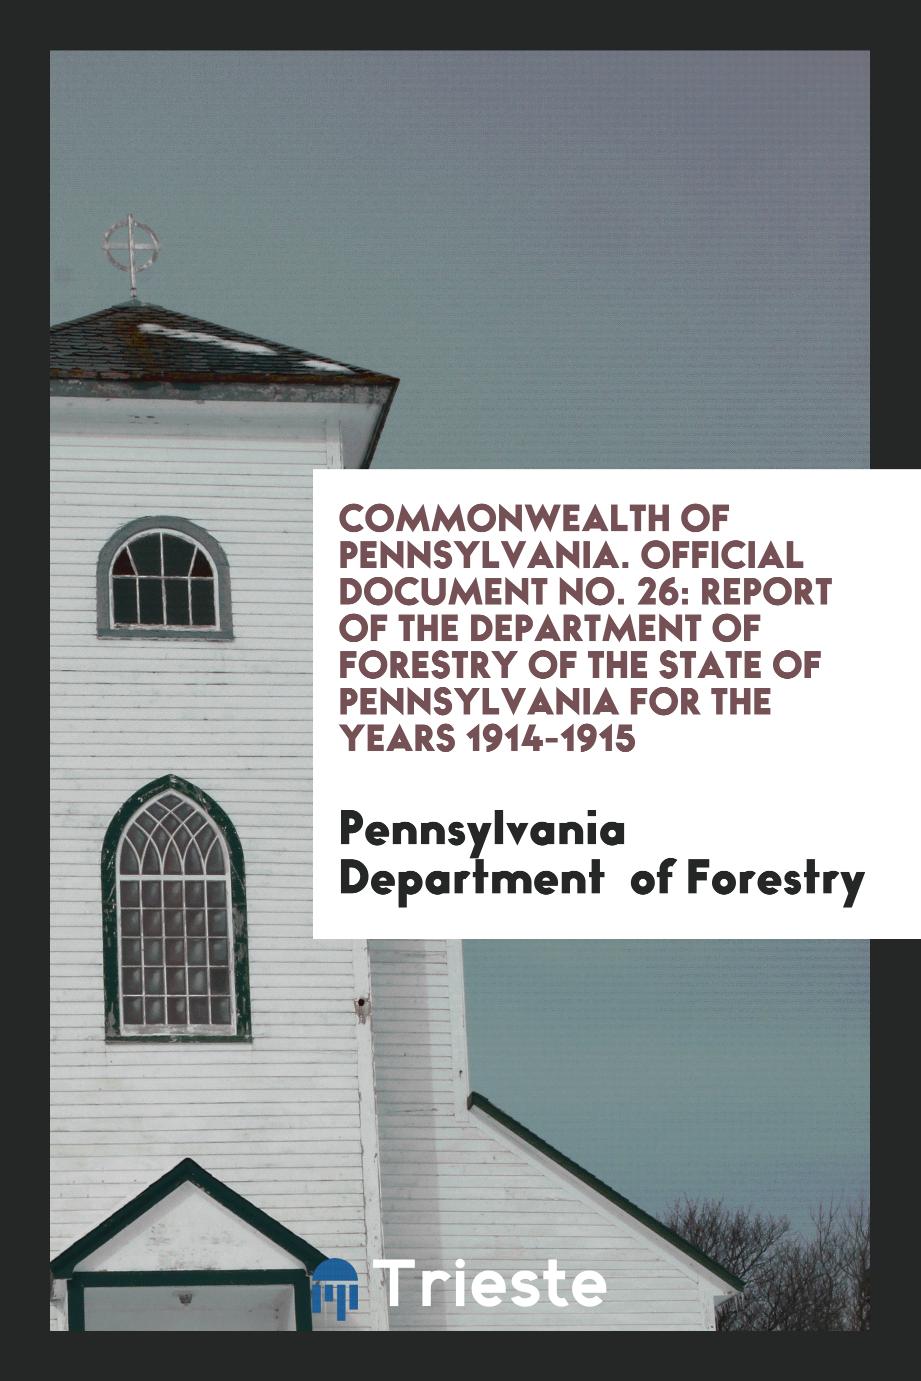 Commonwealth of Pennsylvania. Official Document No. 26: Report of the Department of Forestry of the State of Pennsylvania for the Years 1914-1915